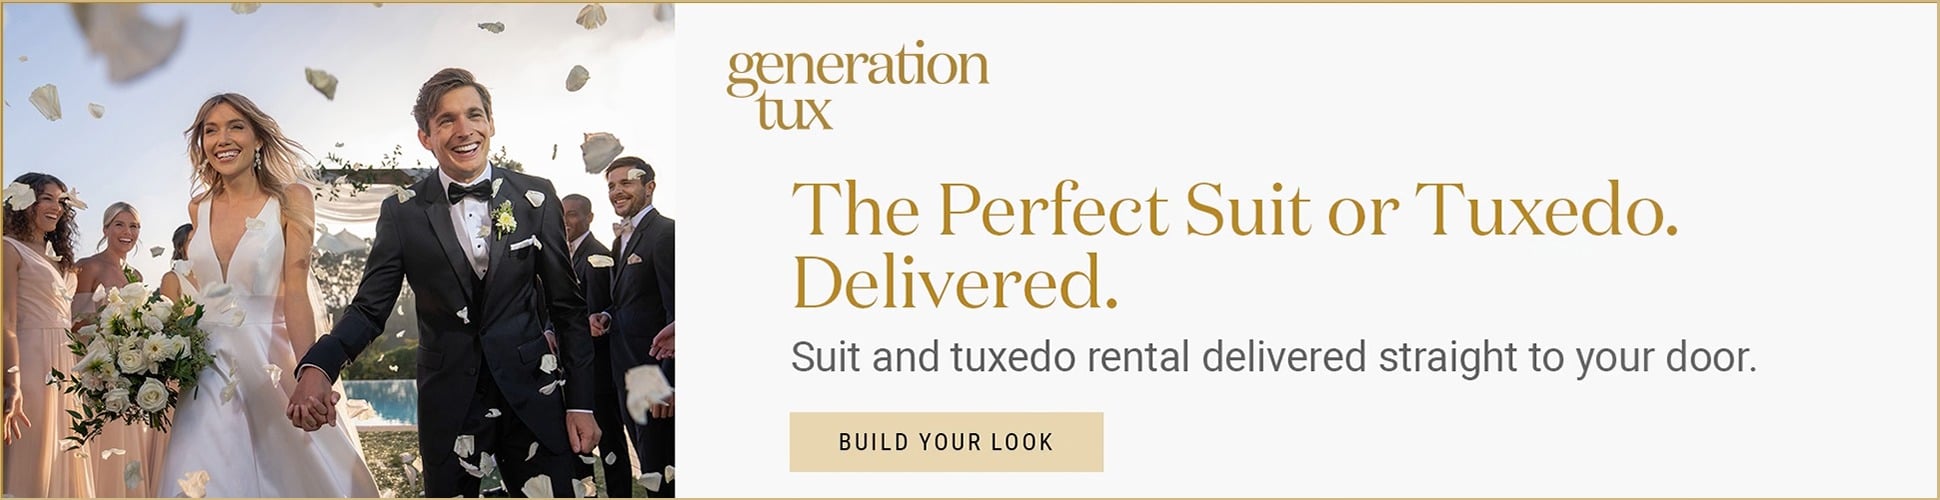 Free suit or tux for the wedding couple.